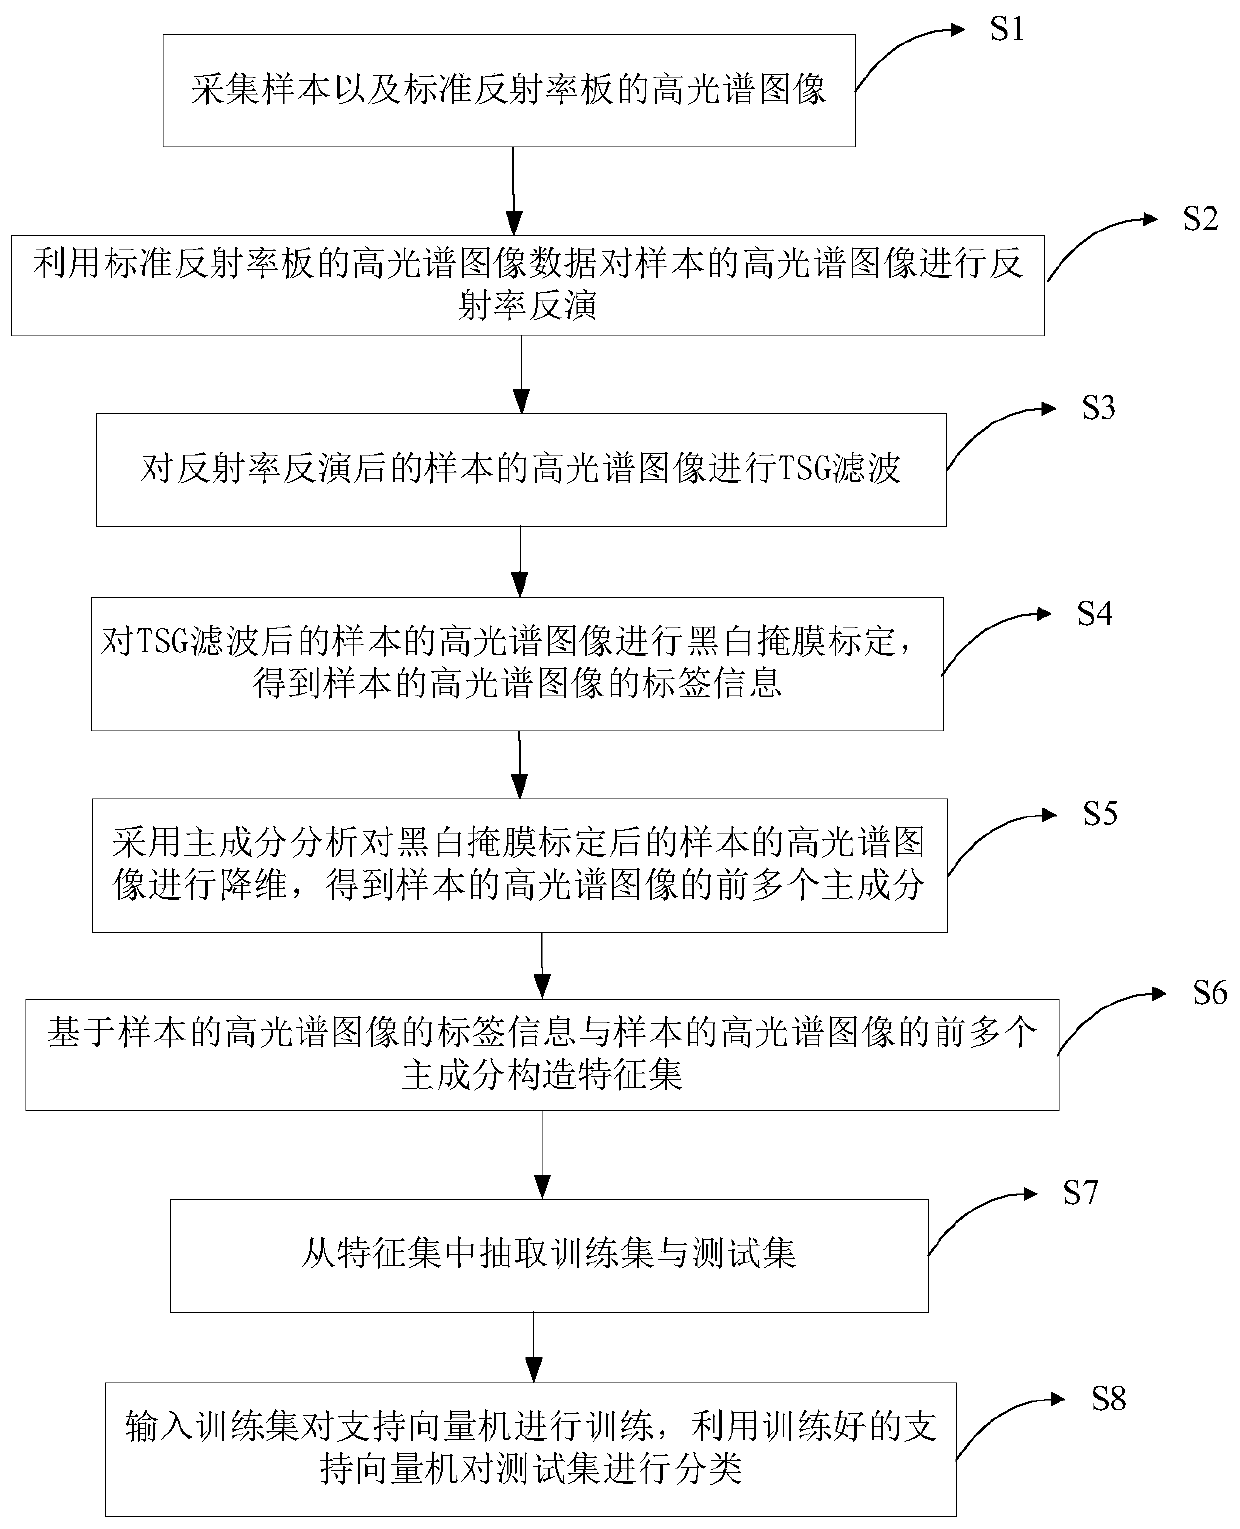 Hyperspectral image classification method and device based on spatial-spectral dimension filtering